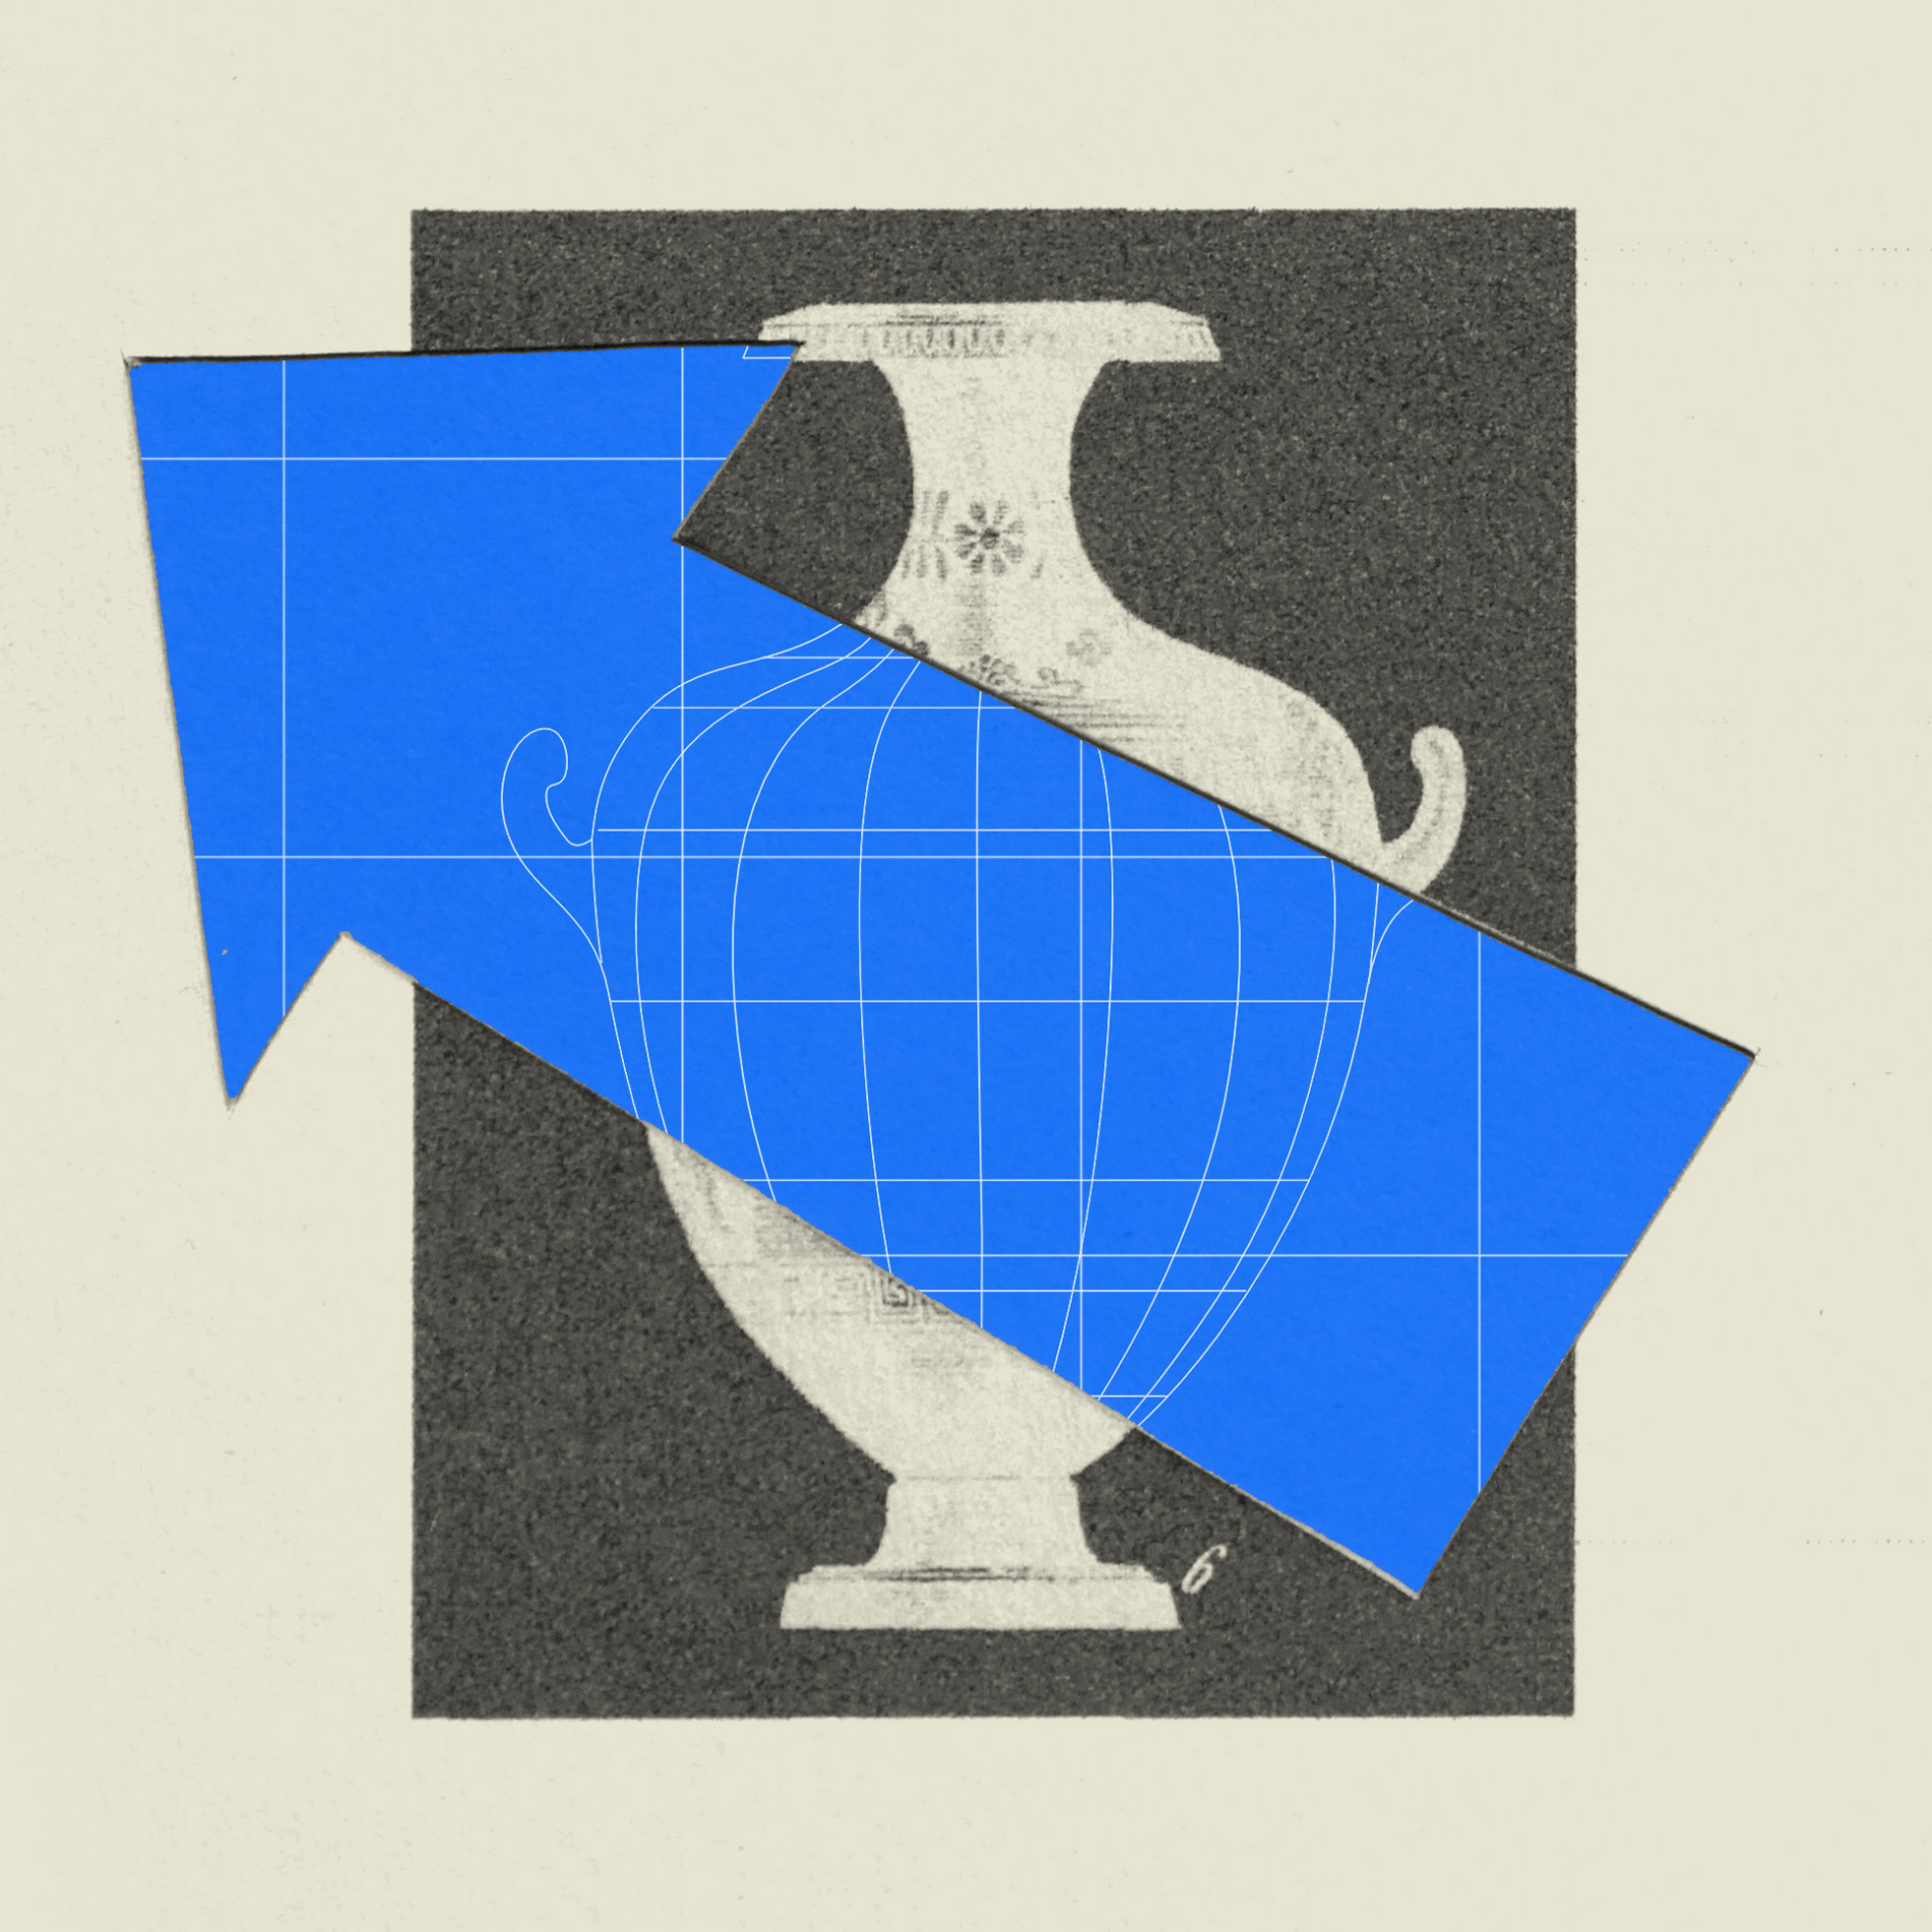 Collage of a vase and a blue arrow